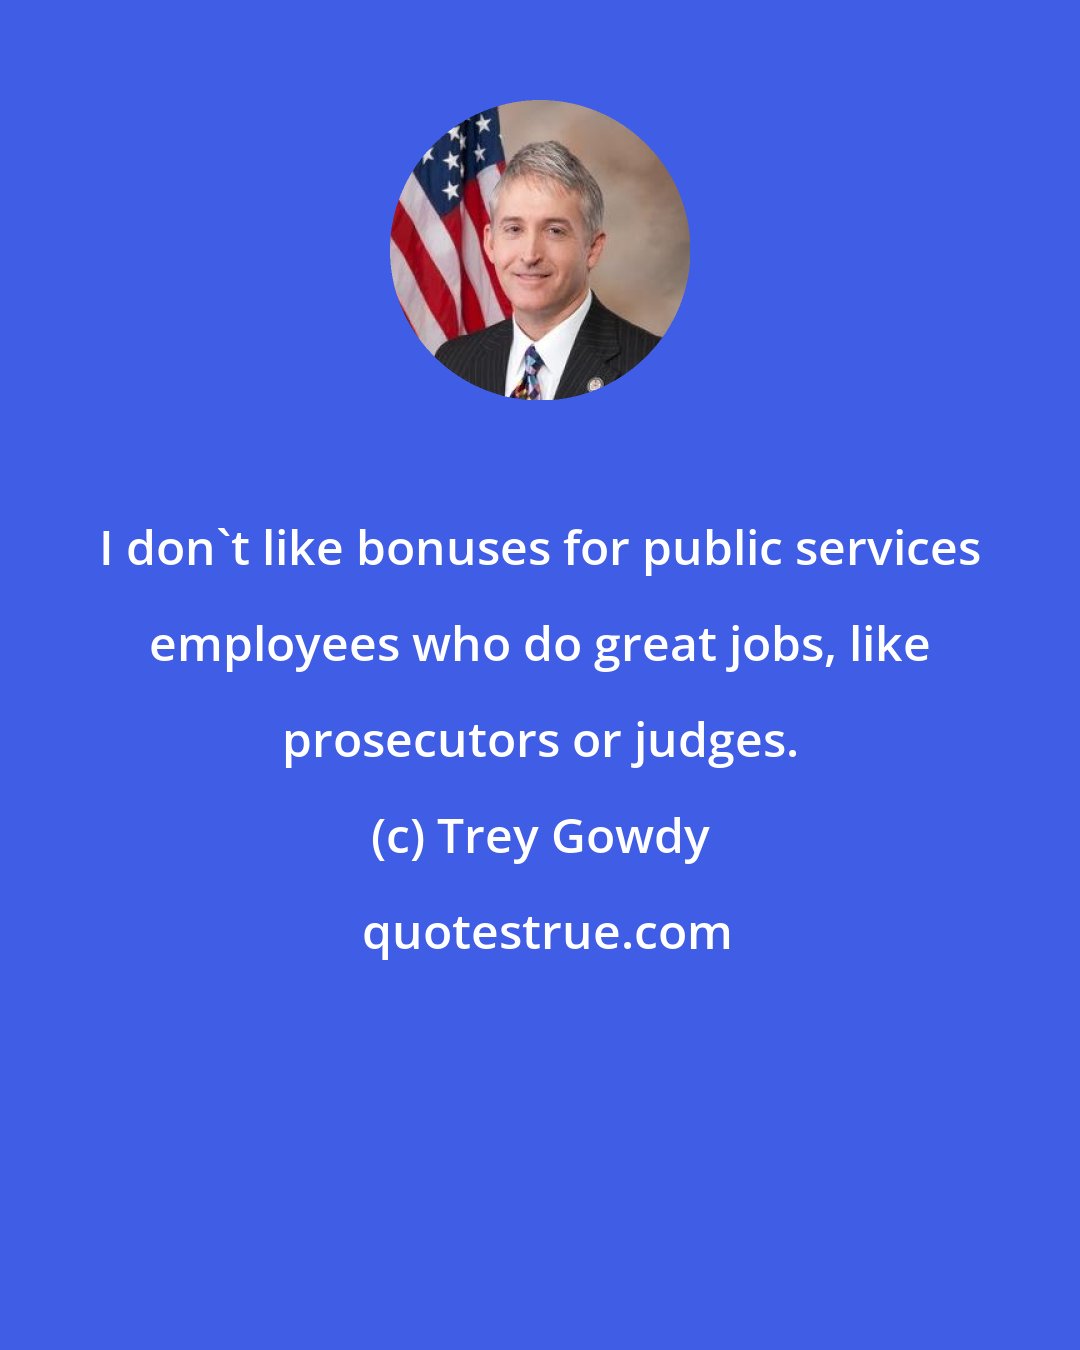 Trey Gowdy: I don't like bonuses for public services employees who do great jobs, like prosecutors or judges.